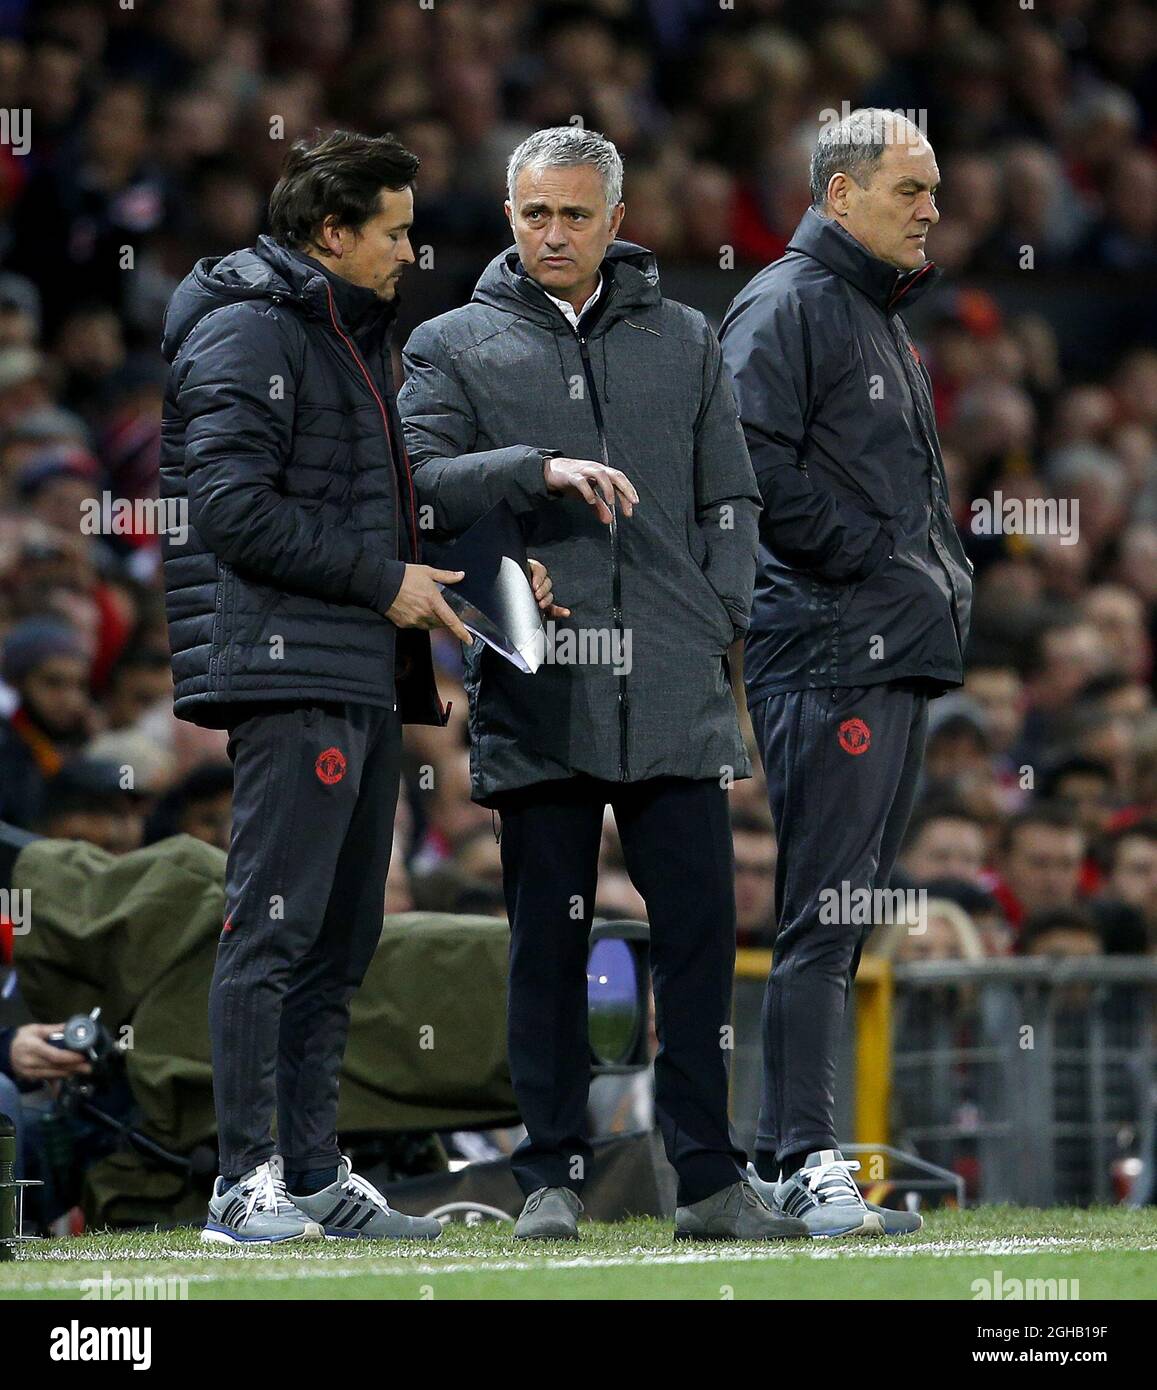 Manchester United manager Jose Mourinho discusses tactics with Assistant  coach Rui Faria during the UEFA Europa League Quarter Final 2nd Leg match  at Old Trafford, Manchester. Picture date: April 20th, 2017. Pic